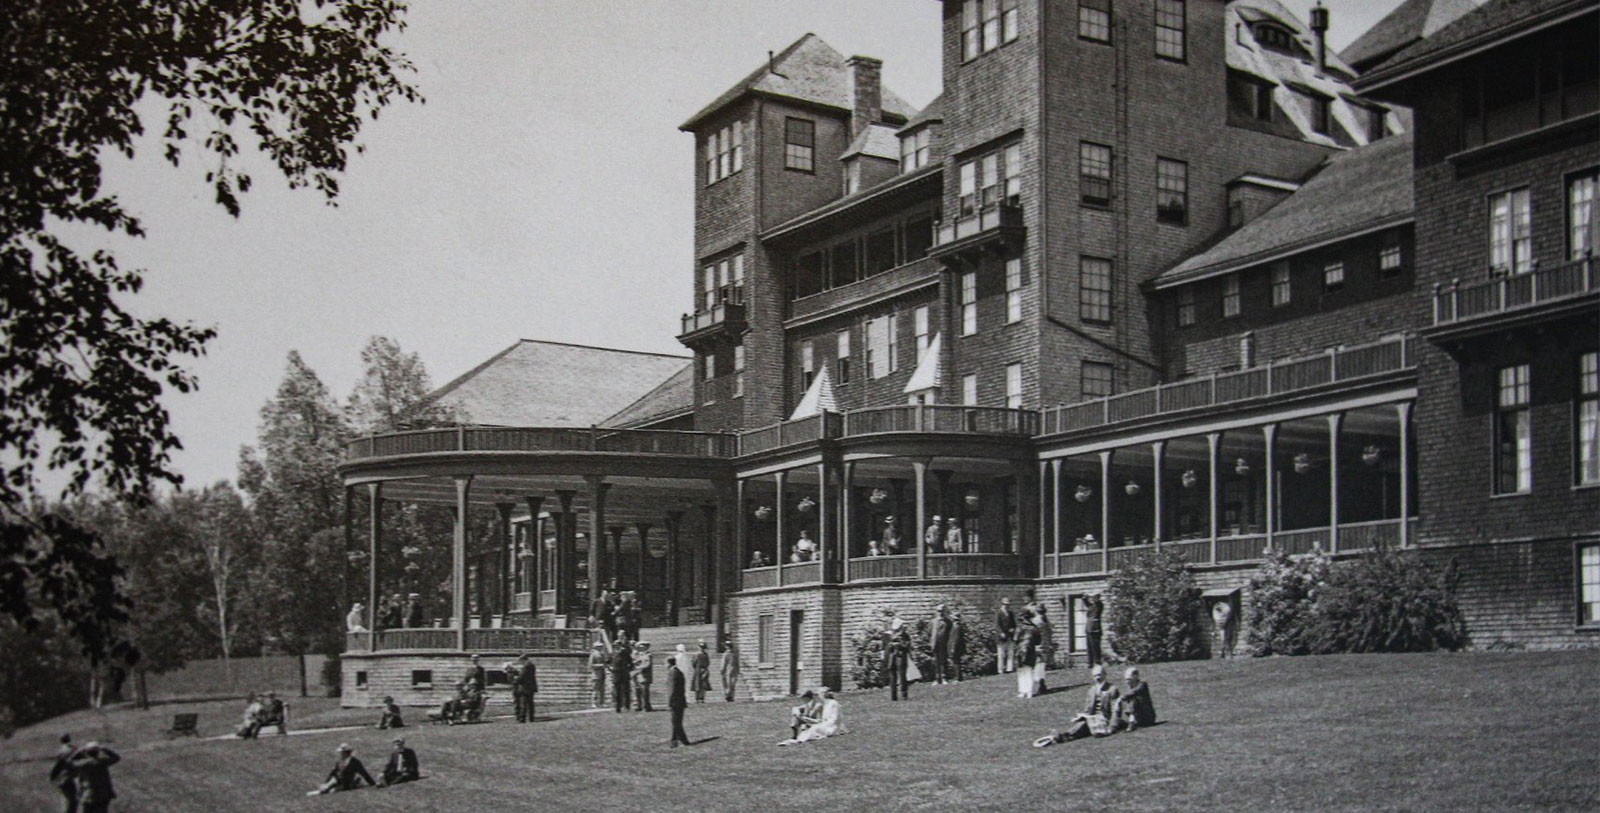 Historic Image Hotel Exterior Fairmont Le Manoir Richelieu, 1899, Member of Historic Hotels Worldwide, in Charlevoix, Quebec, History